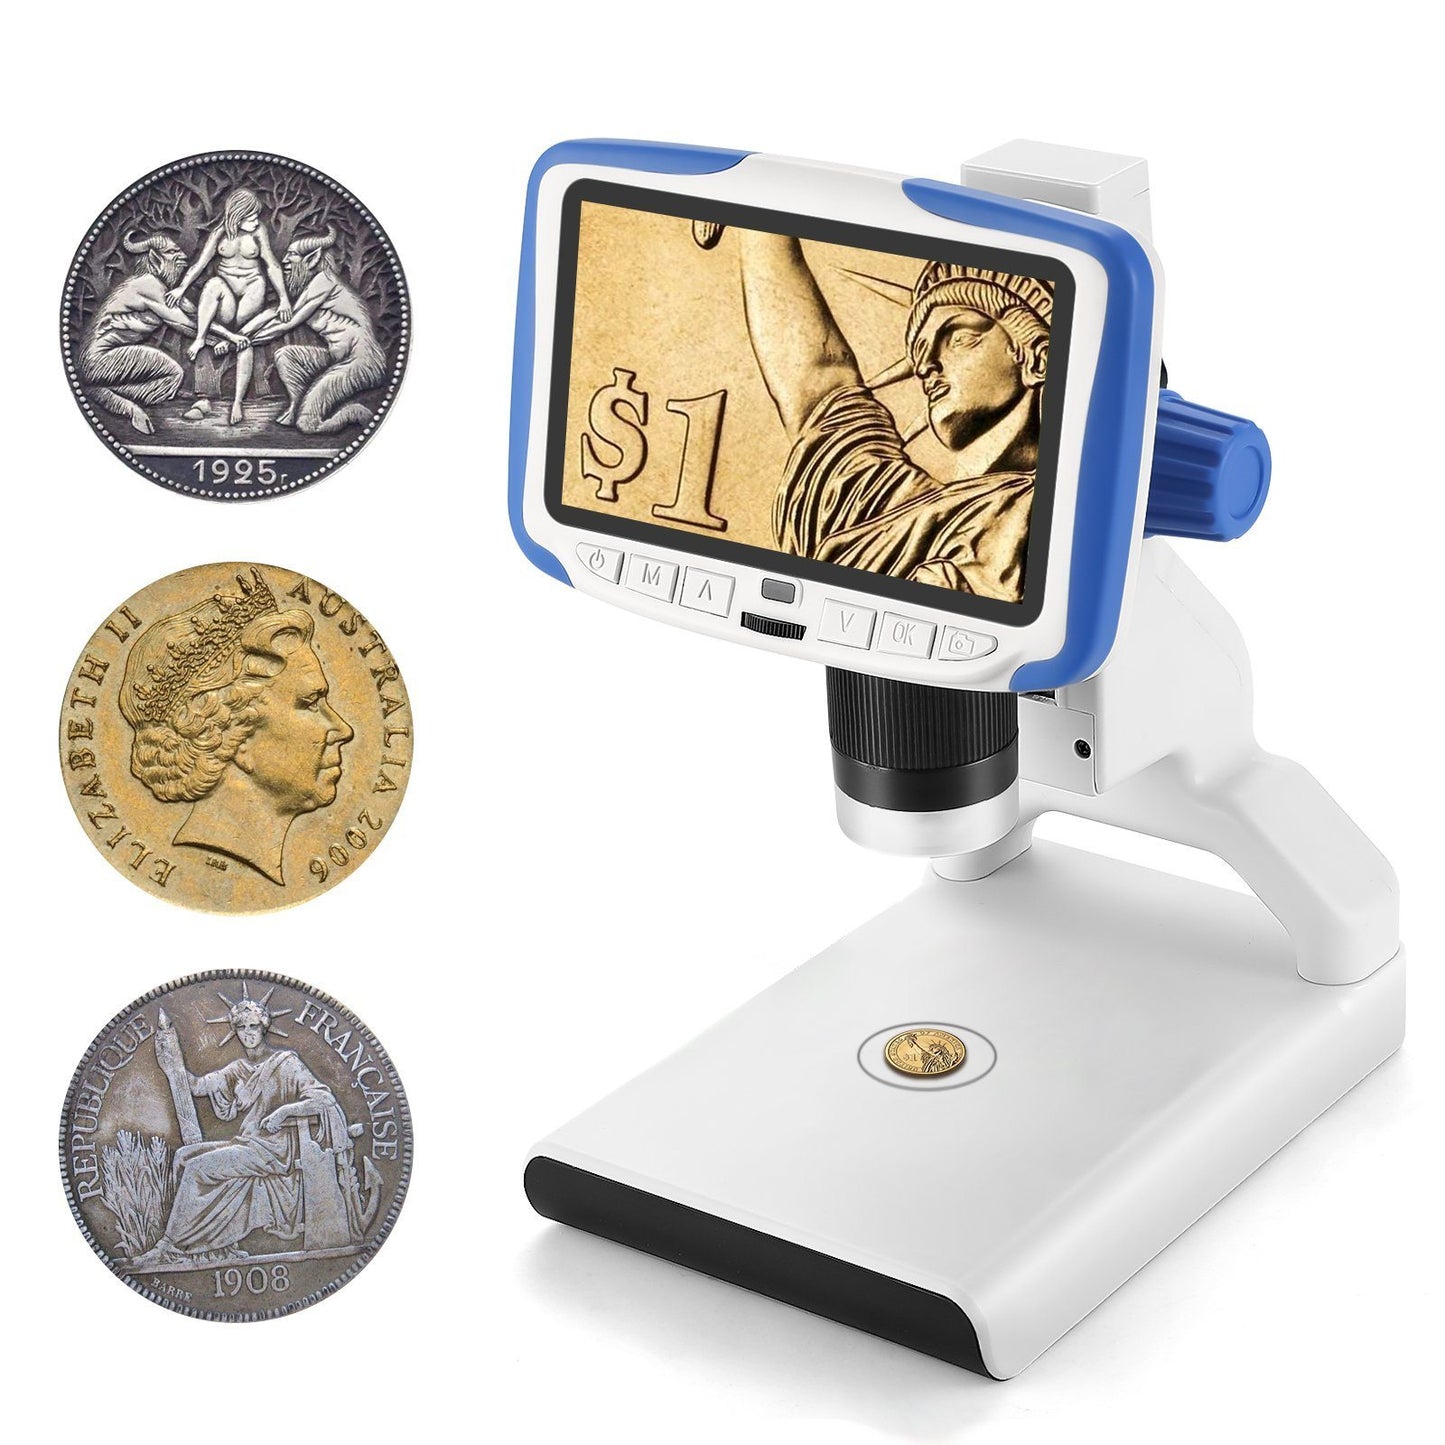 Andonstar AD205 200X Kid's Digital Microscope for Coin Collection and Plant Observation